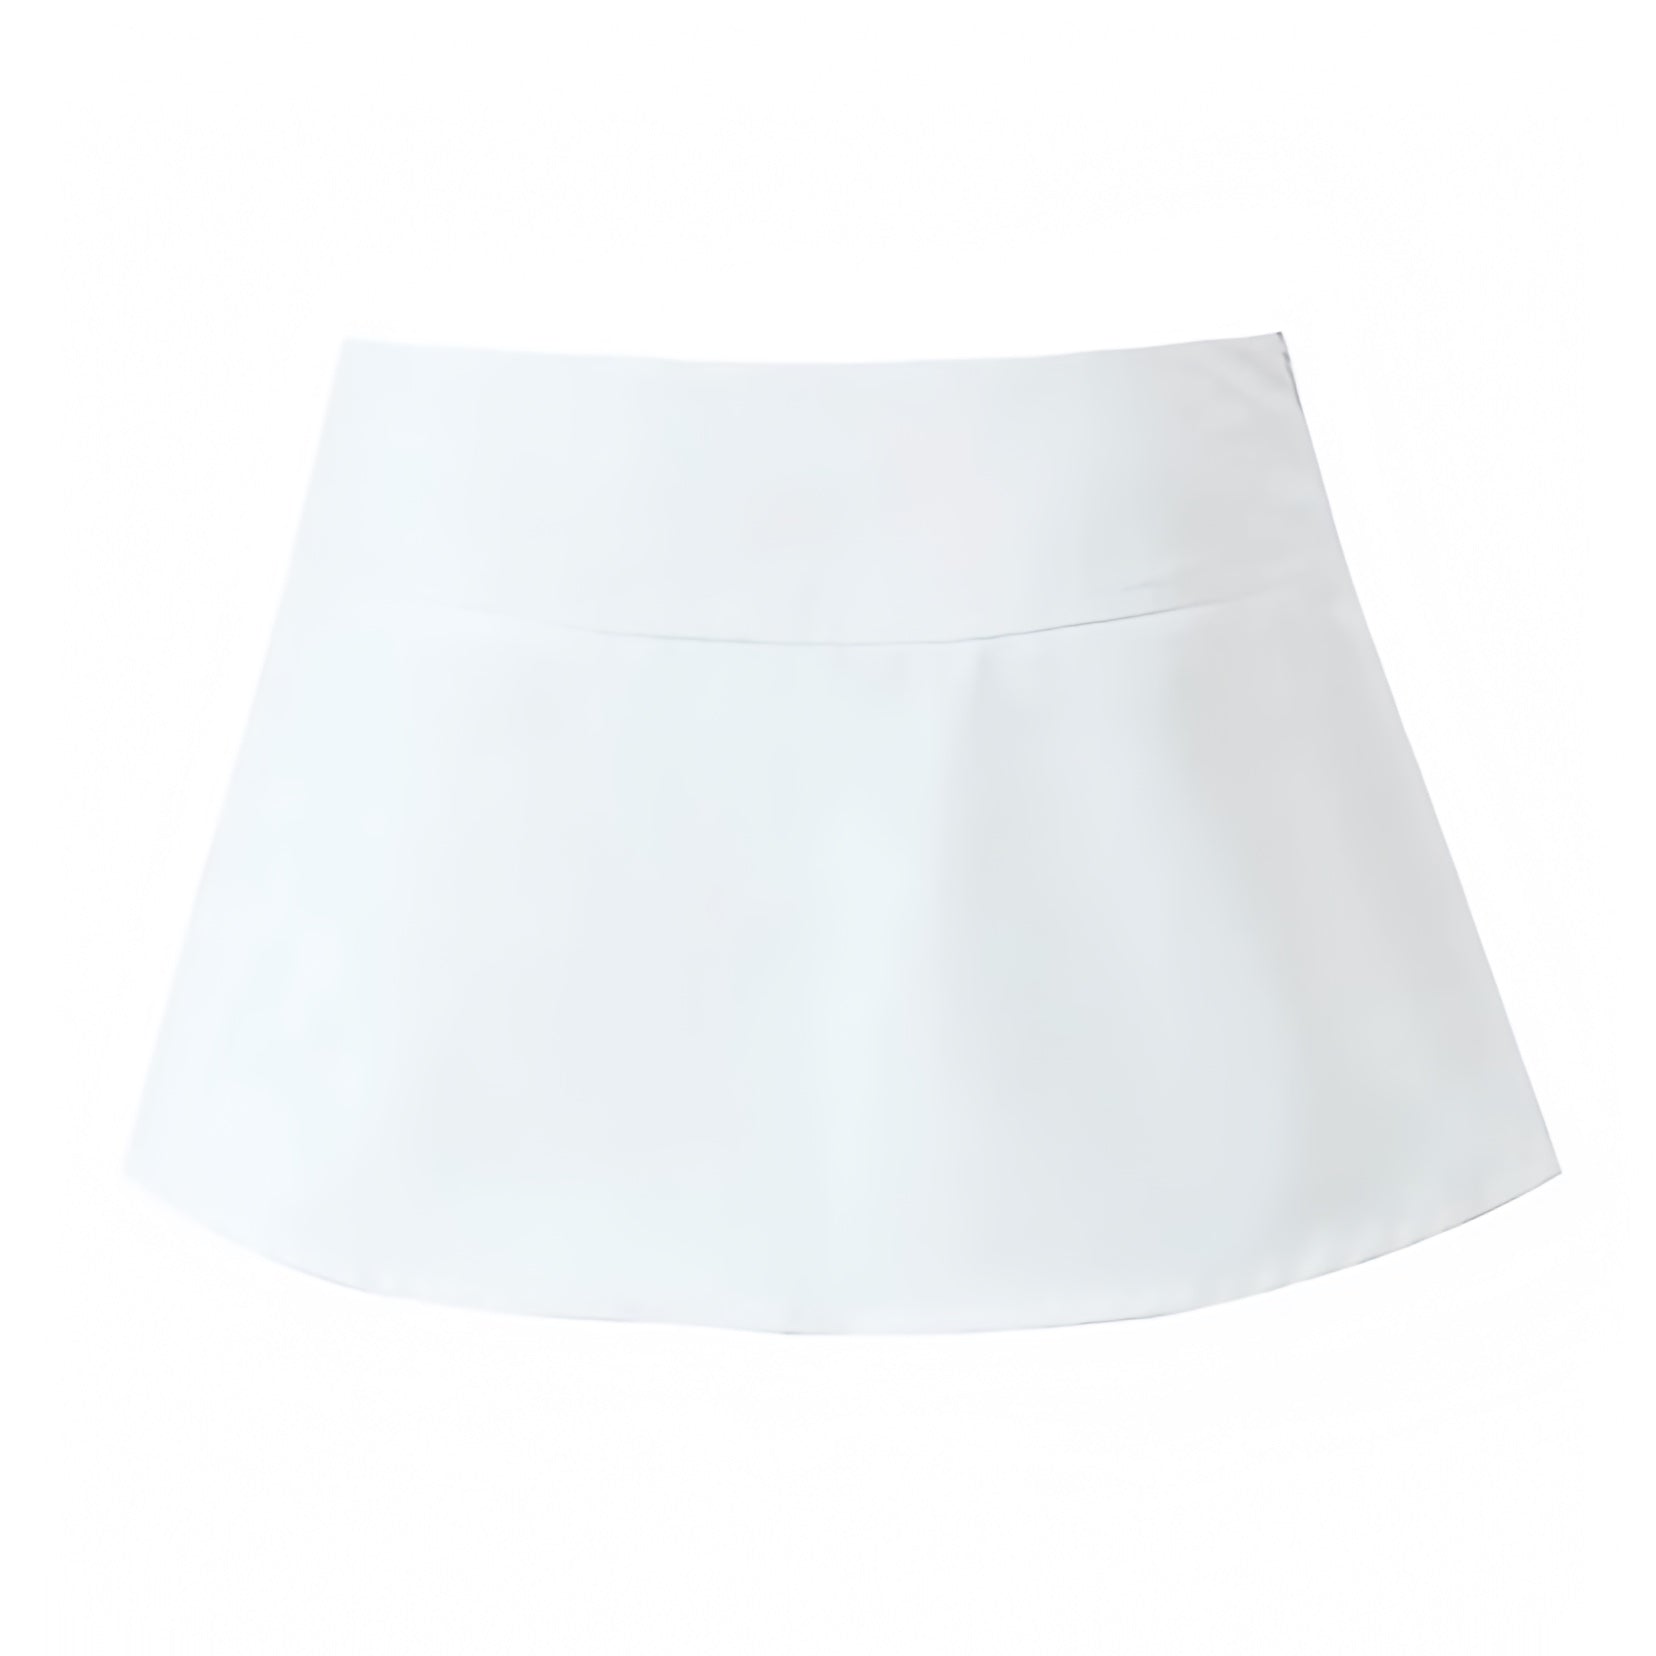 white-ivory-cream-slim-tight-fit-pleated-bow-mid-low-rise-waisted-fitted-waist-slit-short-mini-skirt-skort-with-shorts-women-ladies-chic-trendy-spring-2024-summer-casual-feminine-office-siren-90s-minimalist-coquette-blokette-preppy-school-academia-club-wear-night-out-sexy-party-korean-stockholm-style-zara-revolve-aritzia-brandy-melville-urban-outfitters